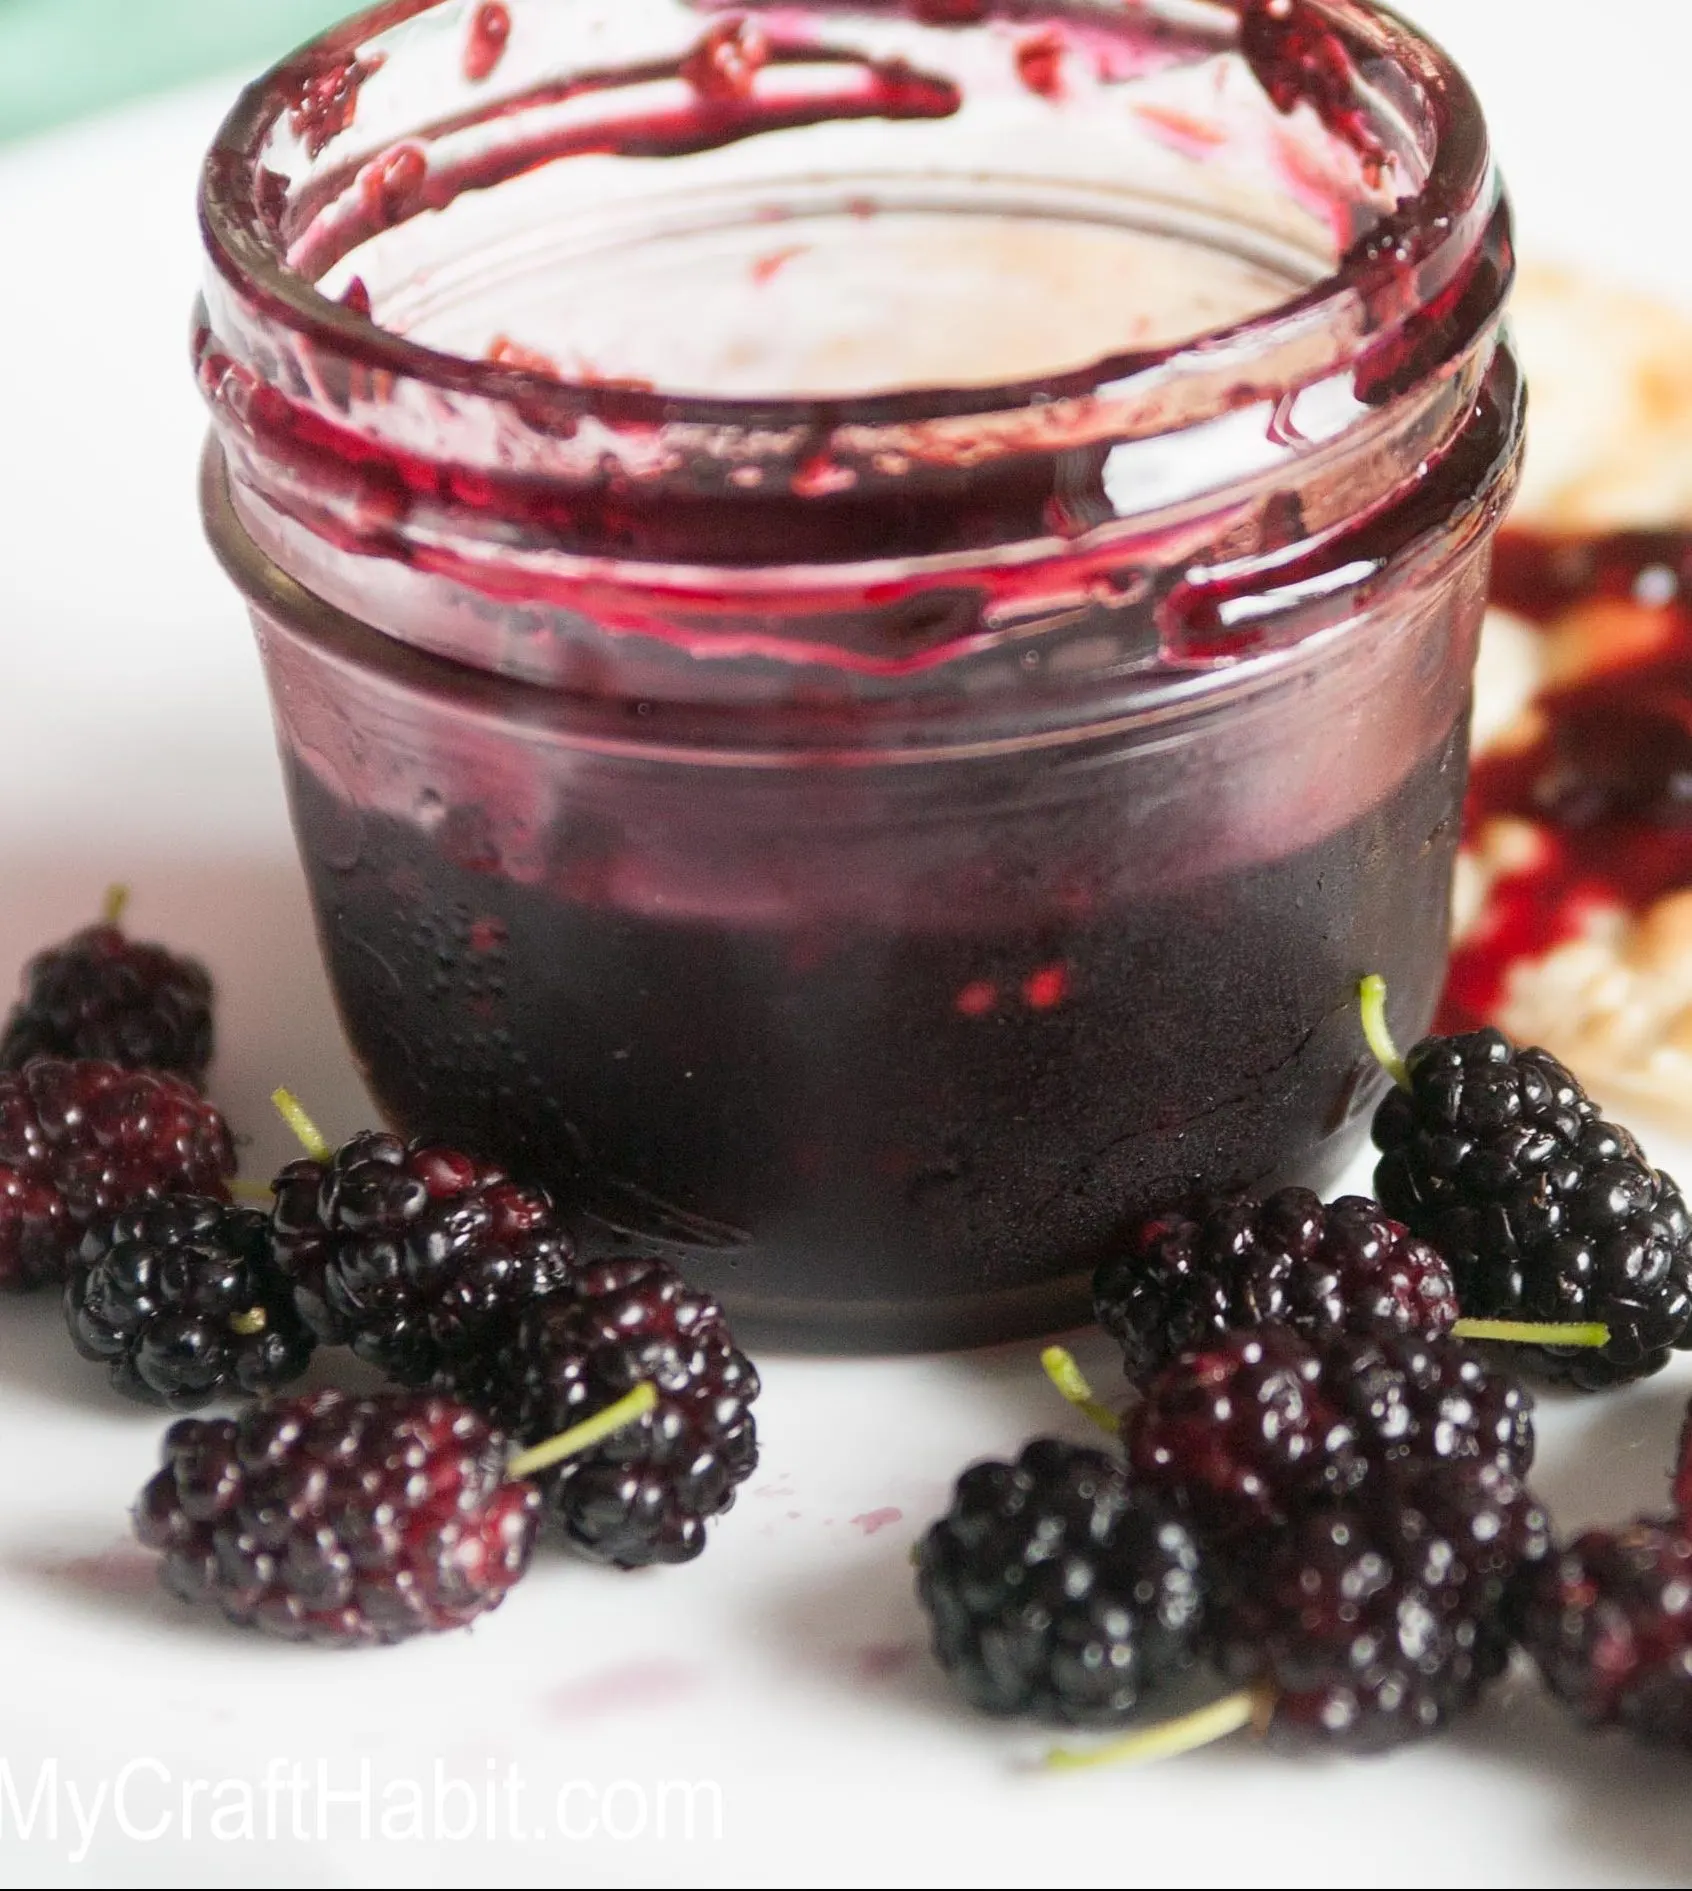 A delicious and easy to follow mulberry jam recipe. A bonus mulberry sauce recipe is included.